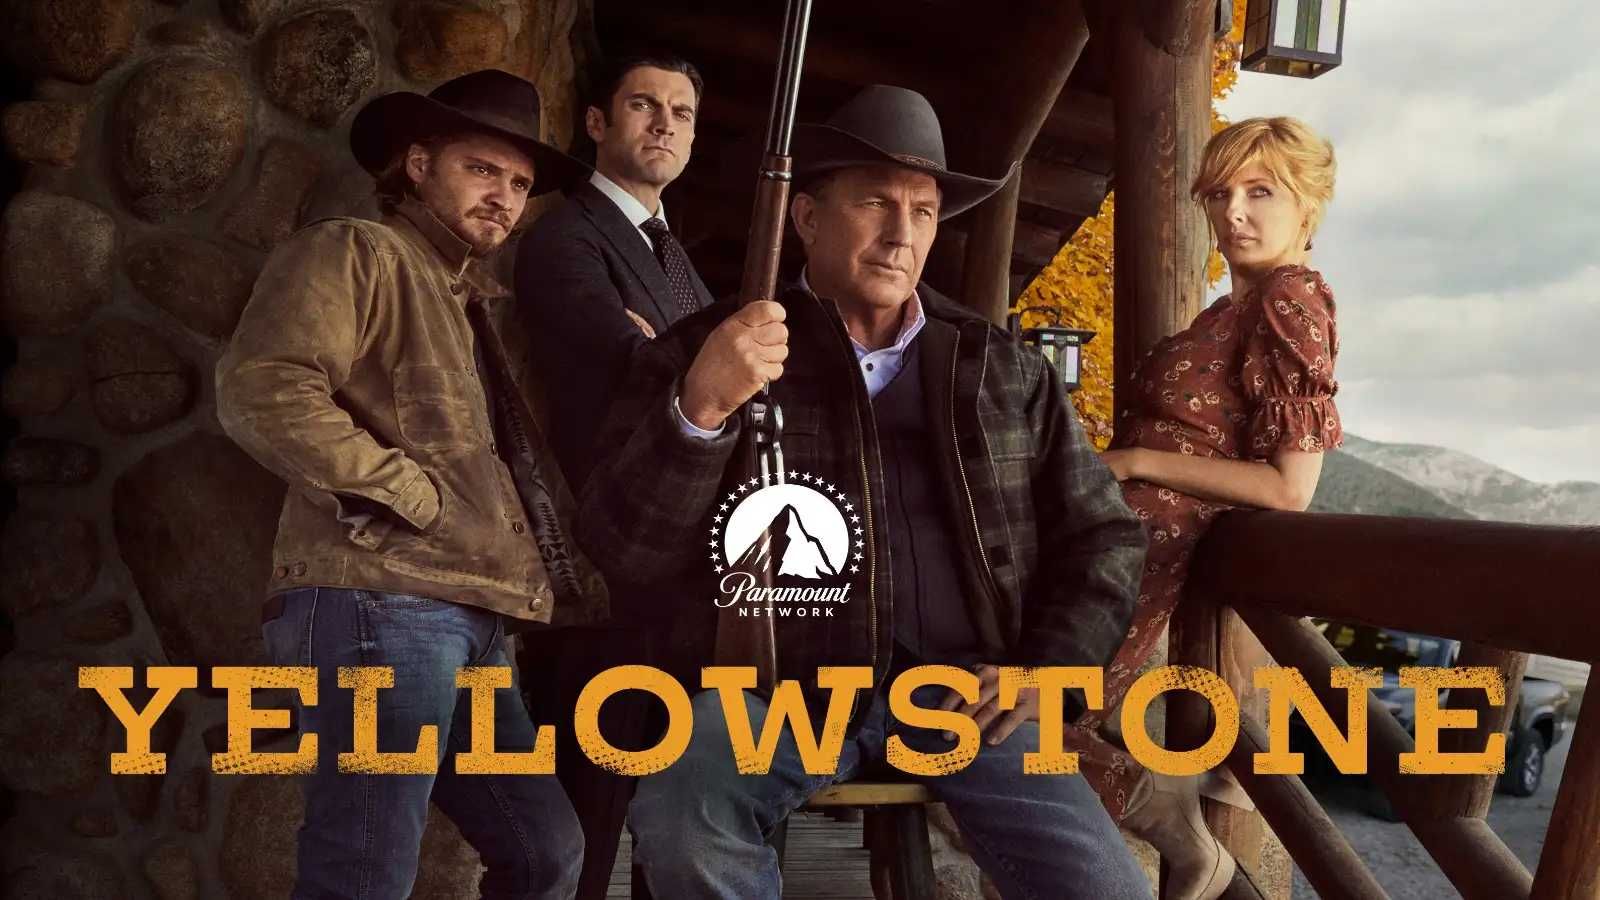 'Yellowstone has hit a cultural nerve:' Kevin Costner’s show surpasses The Walking Dead ratings